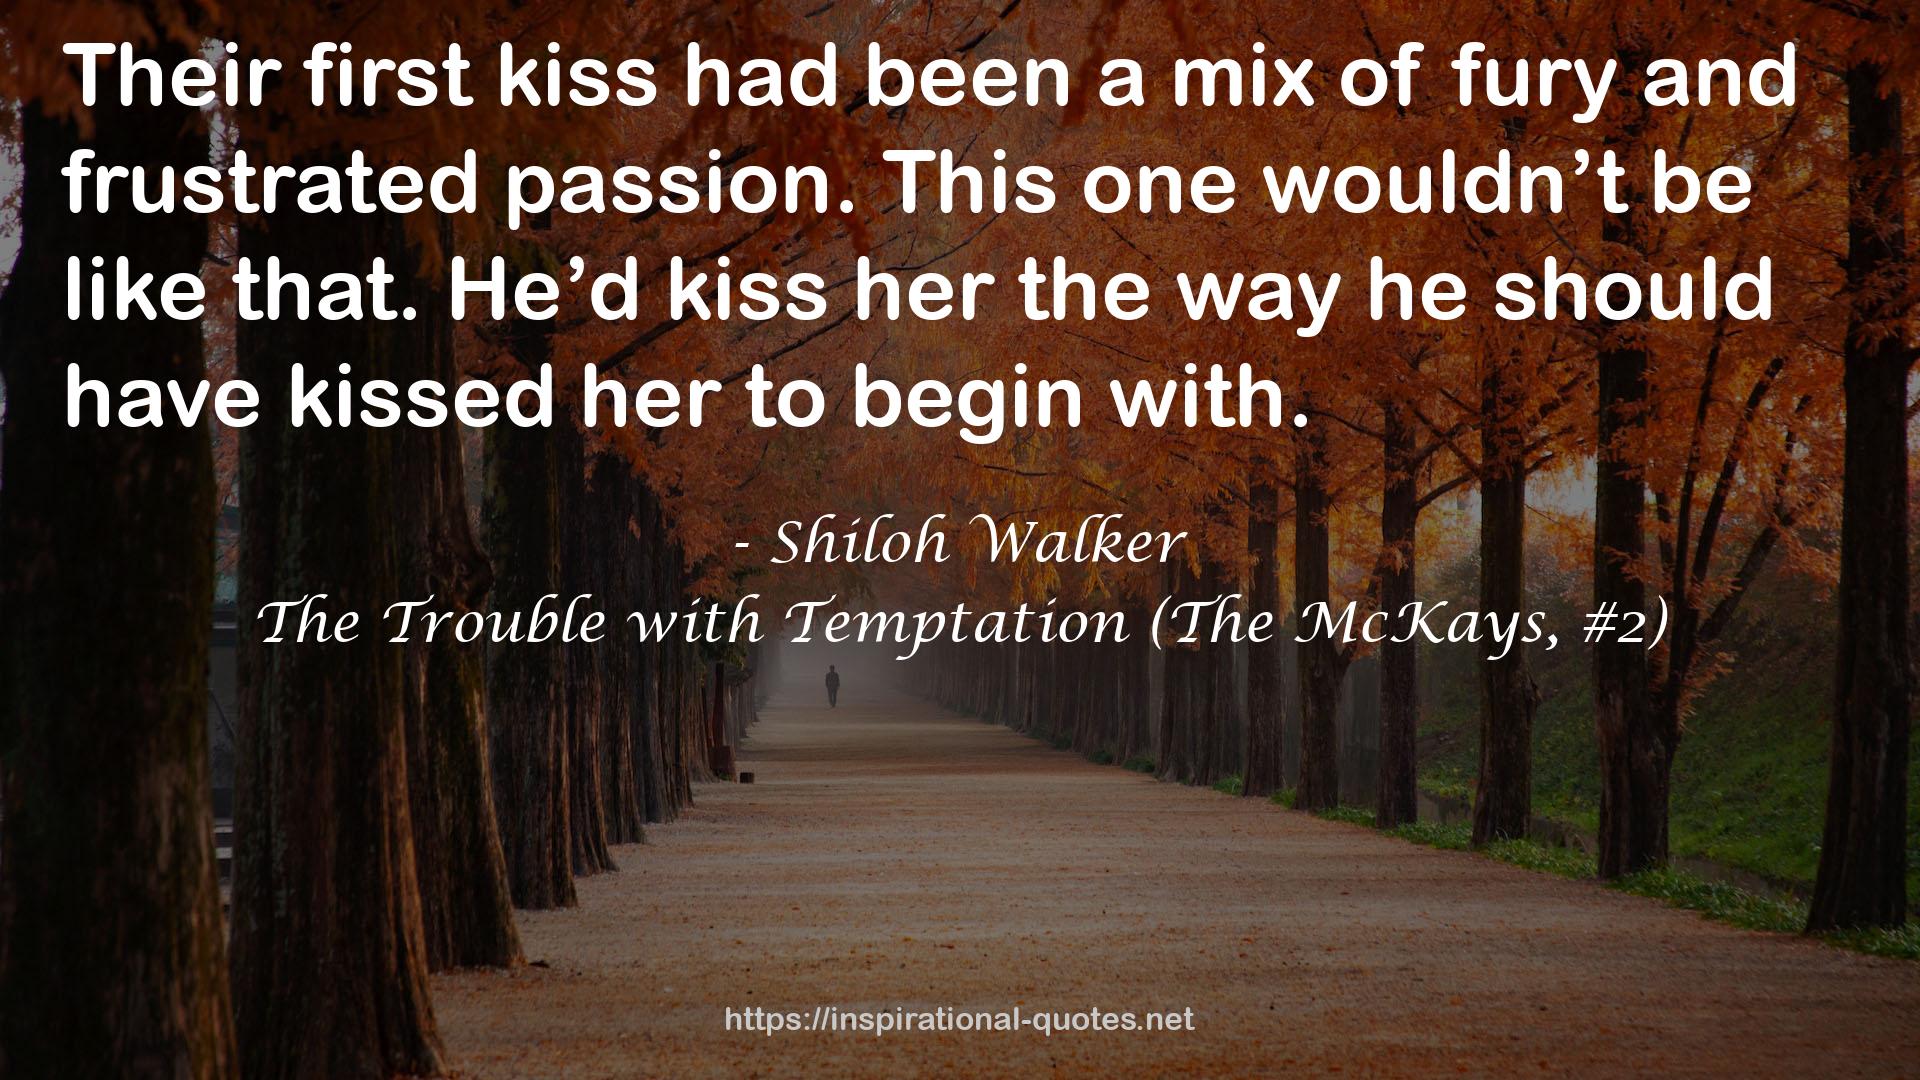 The Trouble with Temptation (The McKays, #2) QUOTES